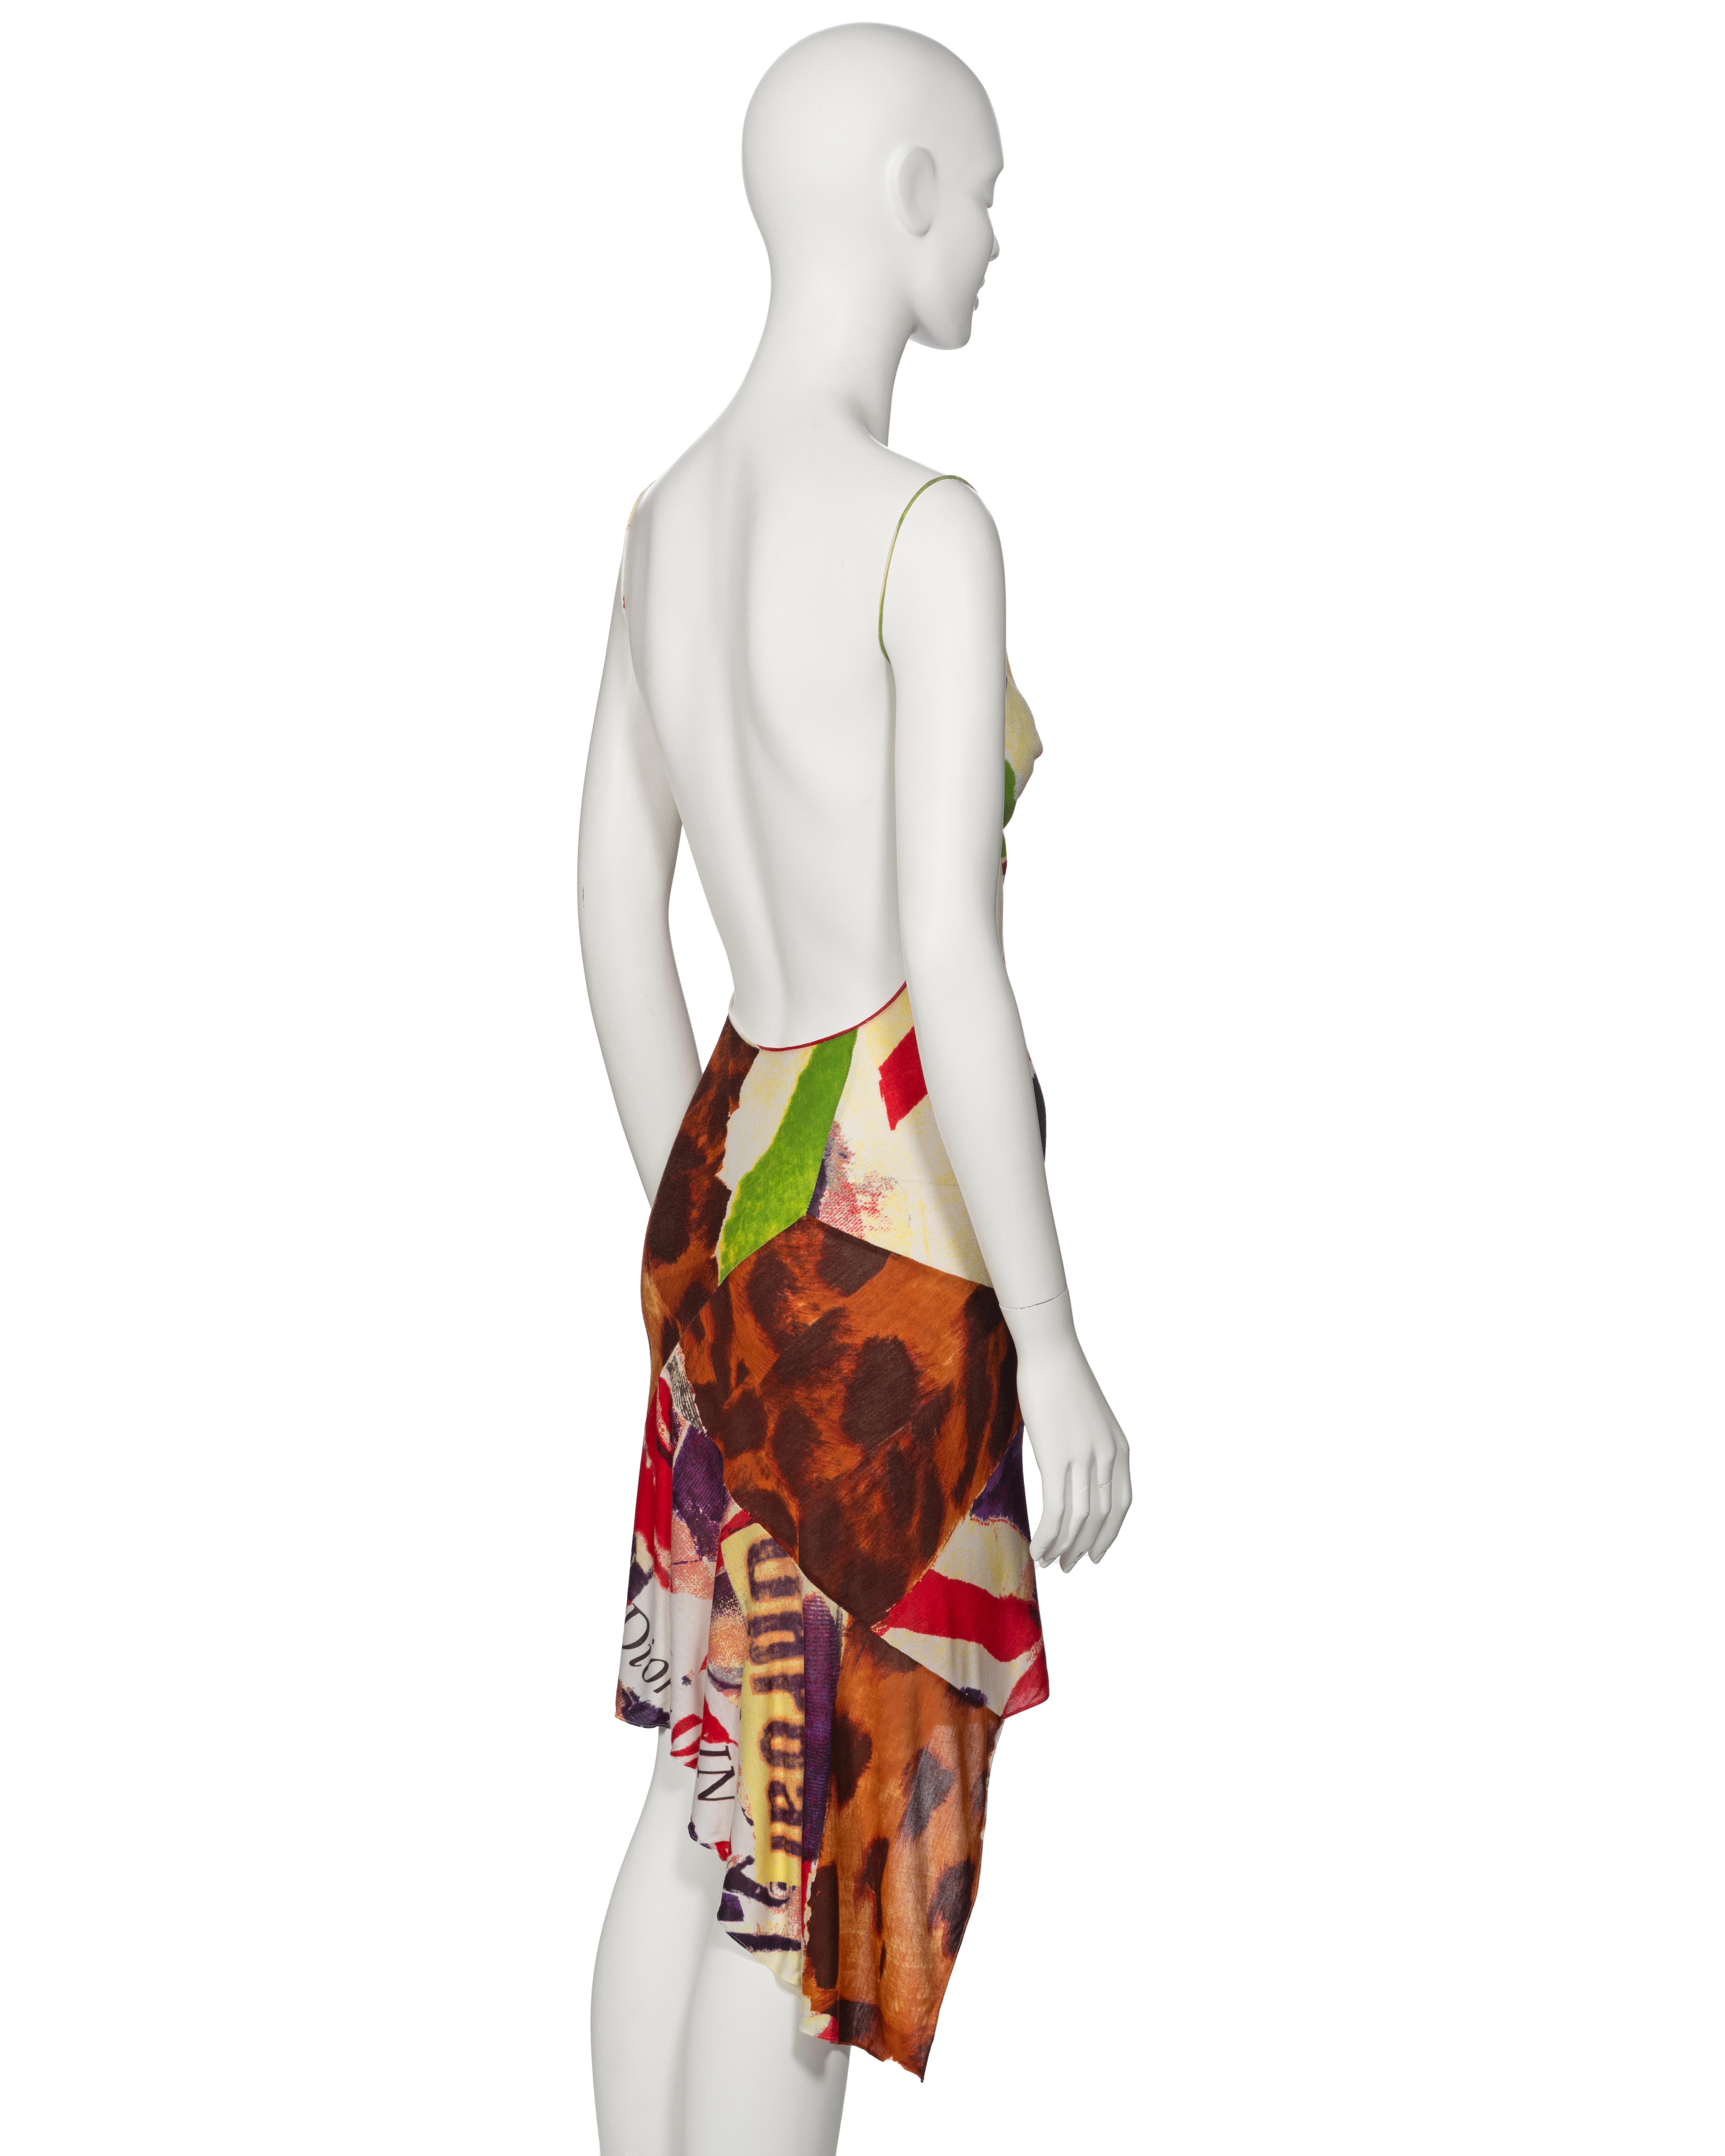 Christian Dior by John Galliano Montage Print Silk Jersey Dress, ss 2003 For Sale 2